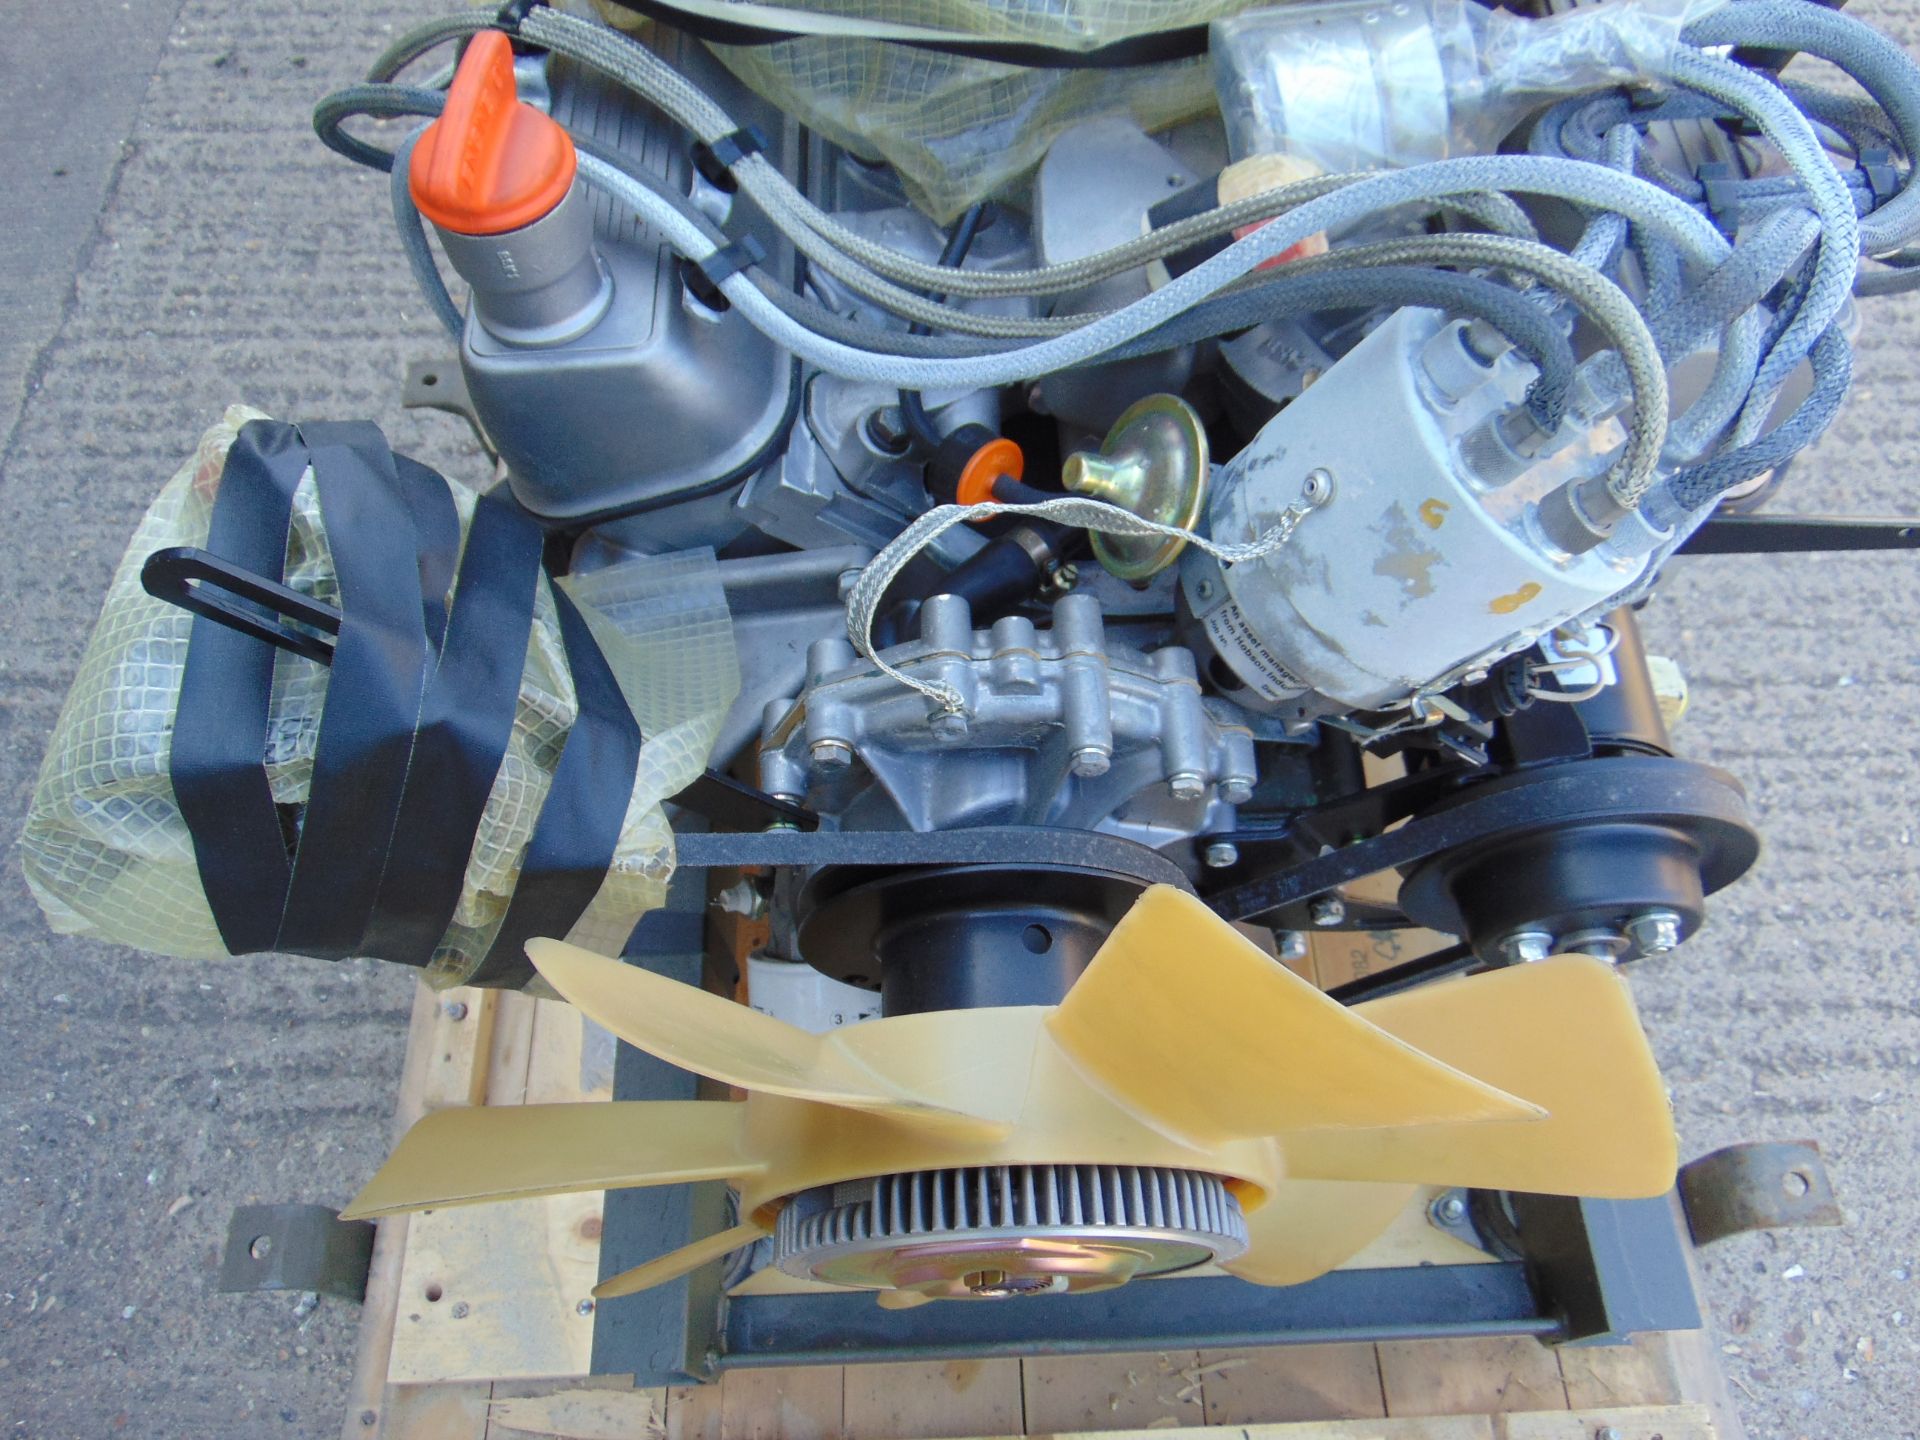 Fully Reconditioned Land Rover V8 Engine c/w all Accessories, as shown in Crate etc - Image 11 of 21